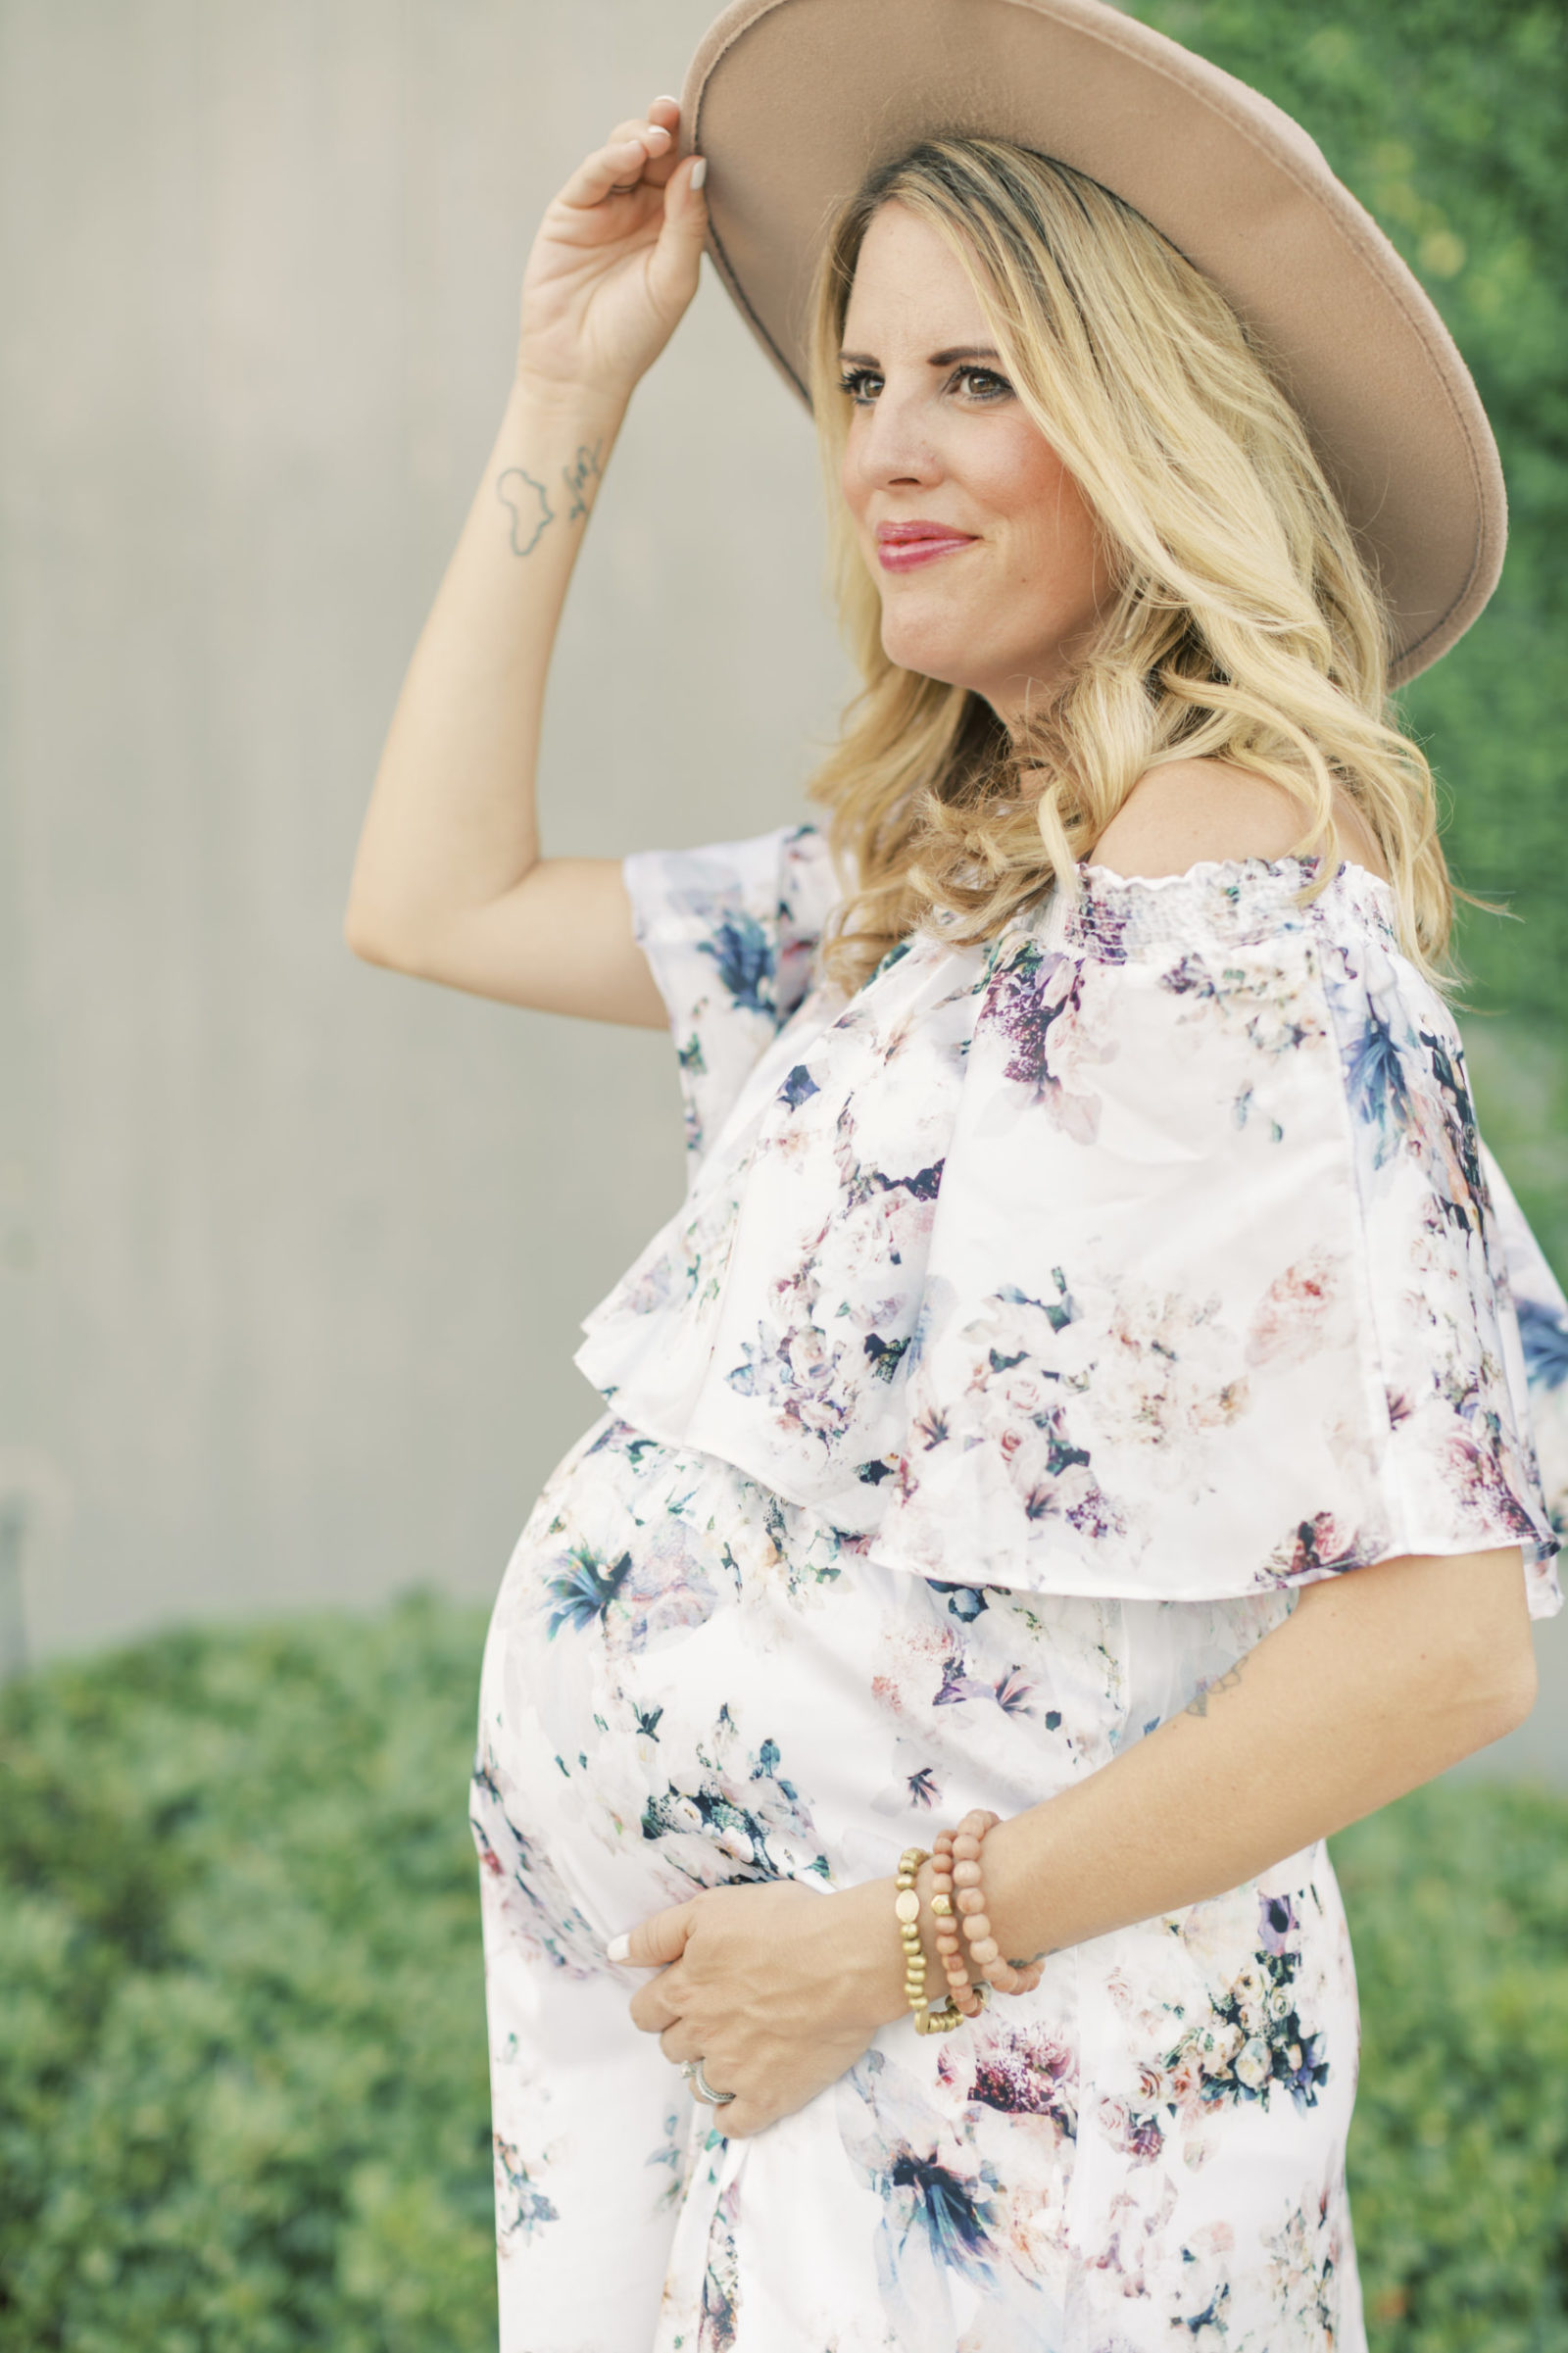 Wynne Elder shares how she uses Young Living essential oils with her Whimsy + Wellness products to support her pregnancy.